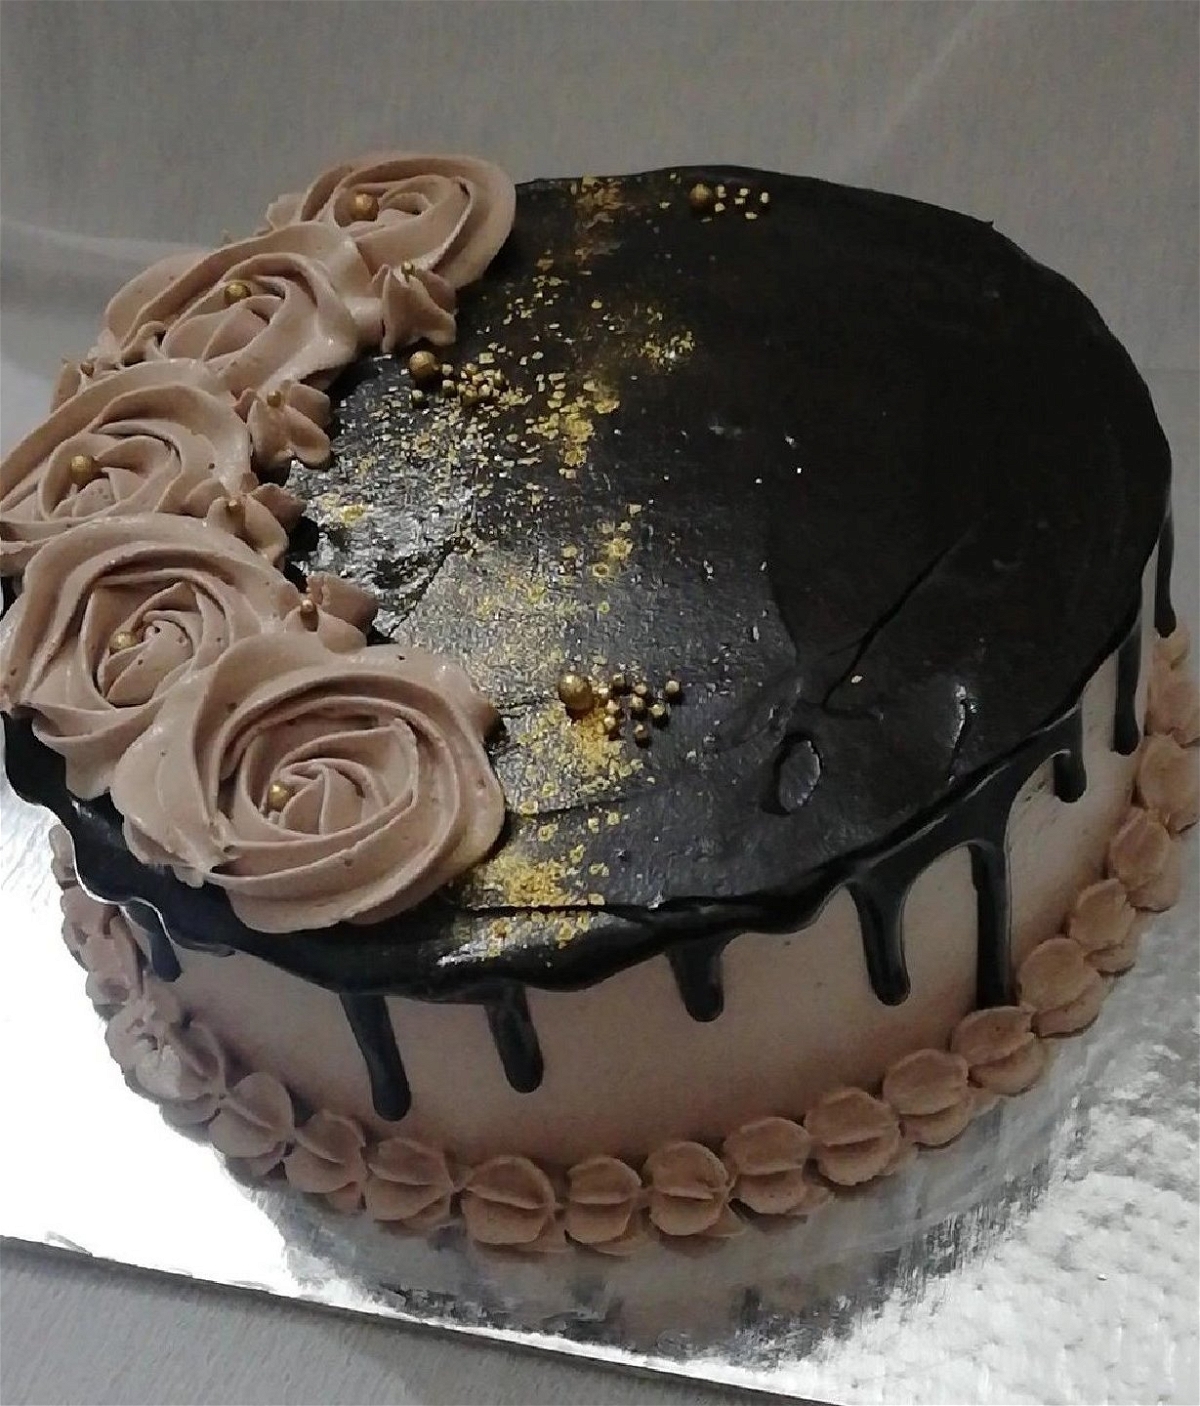 Deep Creamy Choclate Cake Topped With Golden Sprinkles And Semi Brown Flowers - 1 Pound